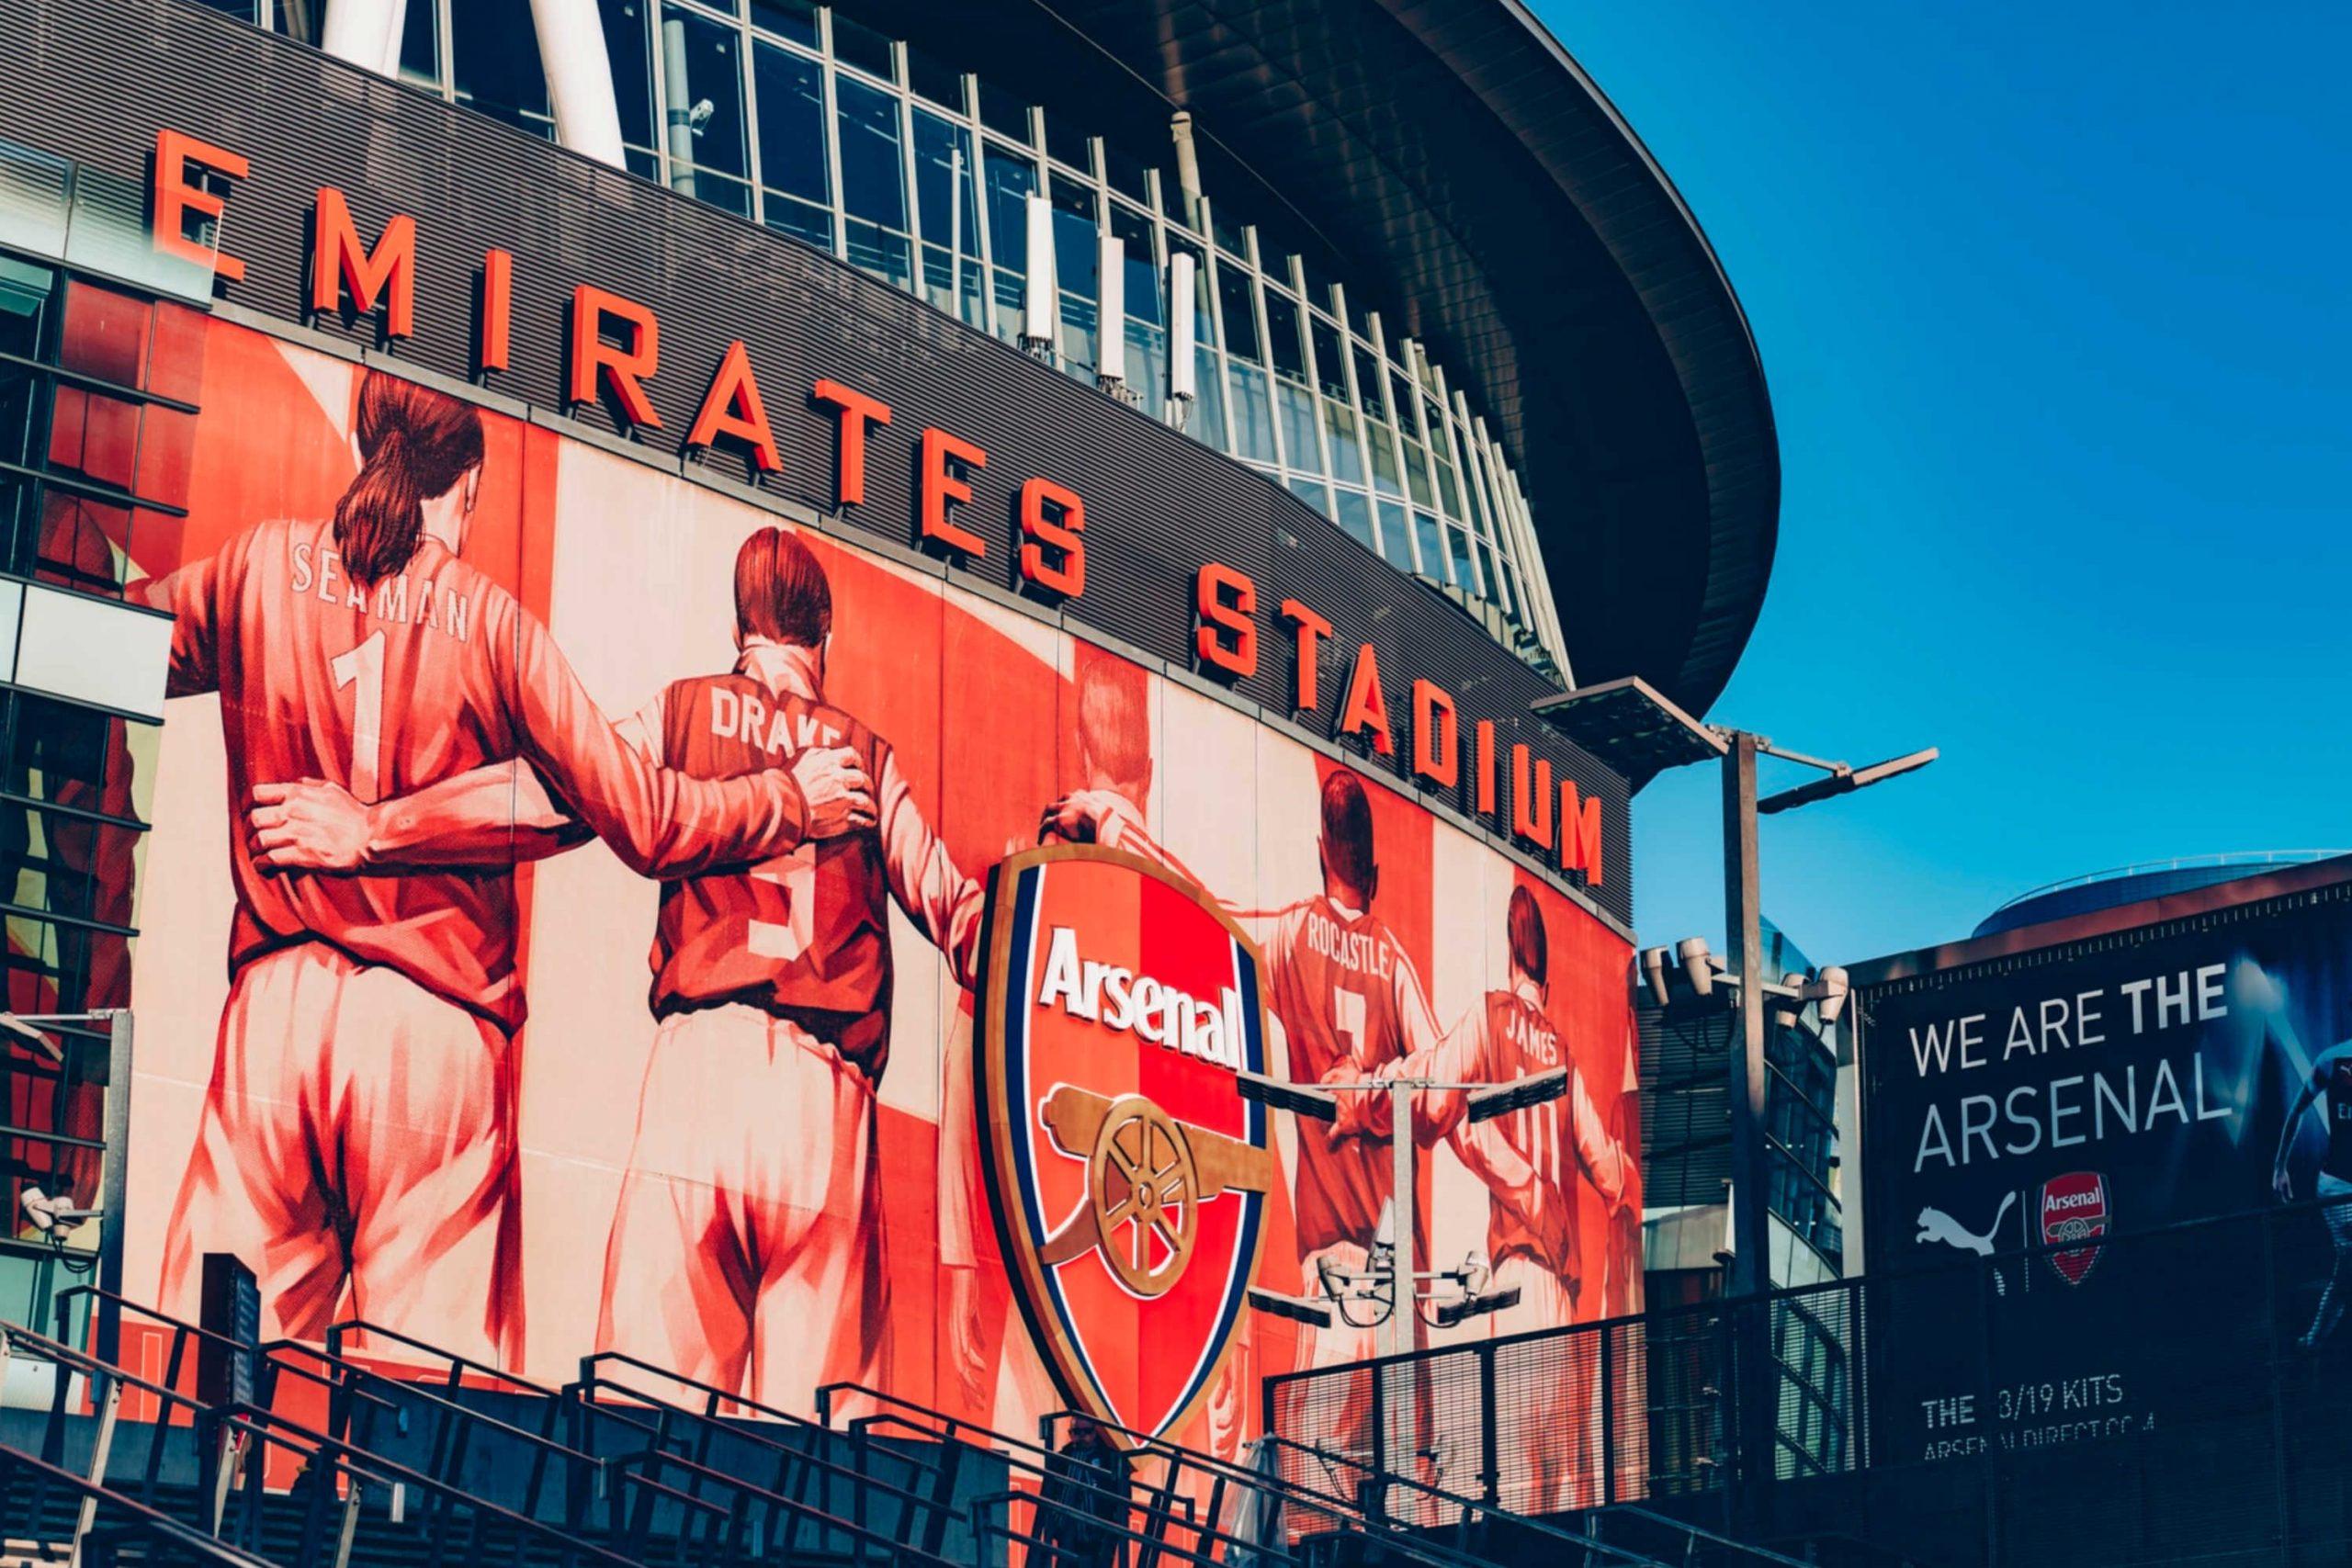 New logo is a massive problem as Arsenal home kit for 20/21 season gets leaked online